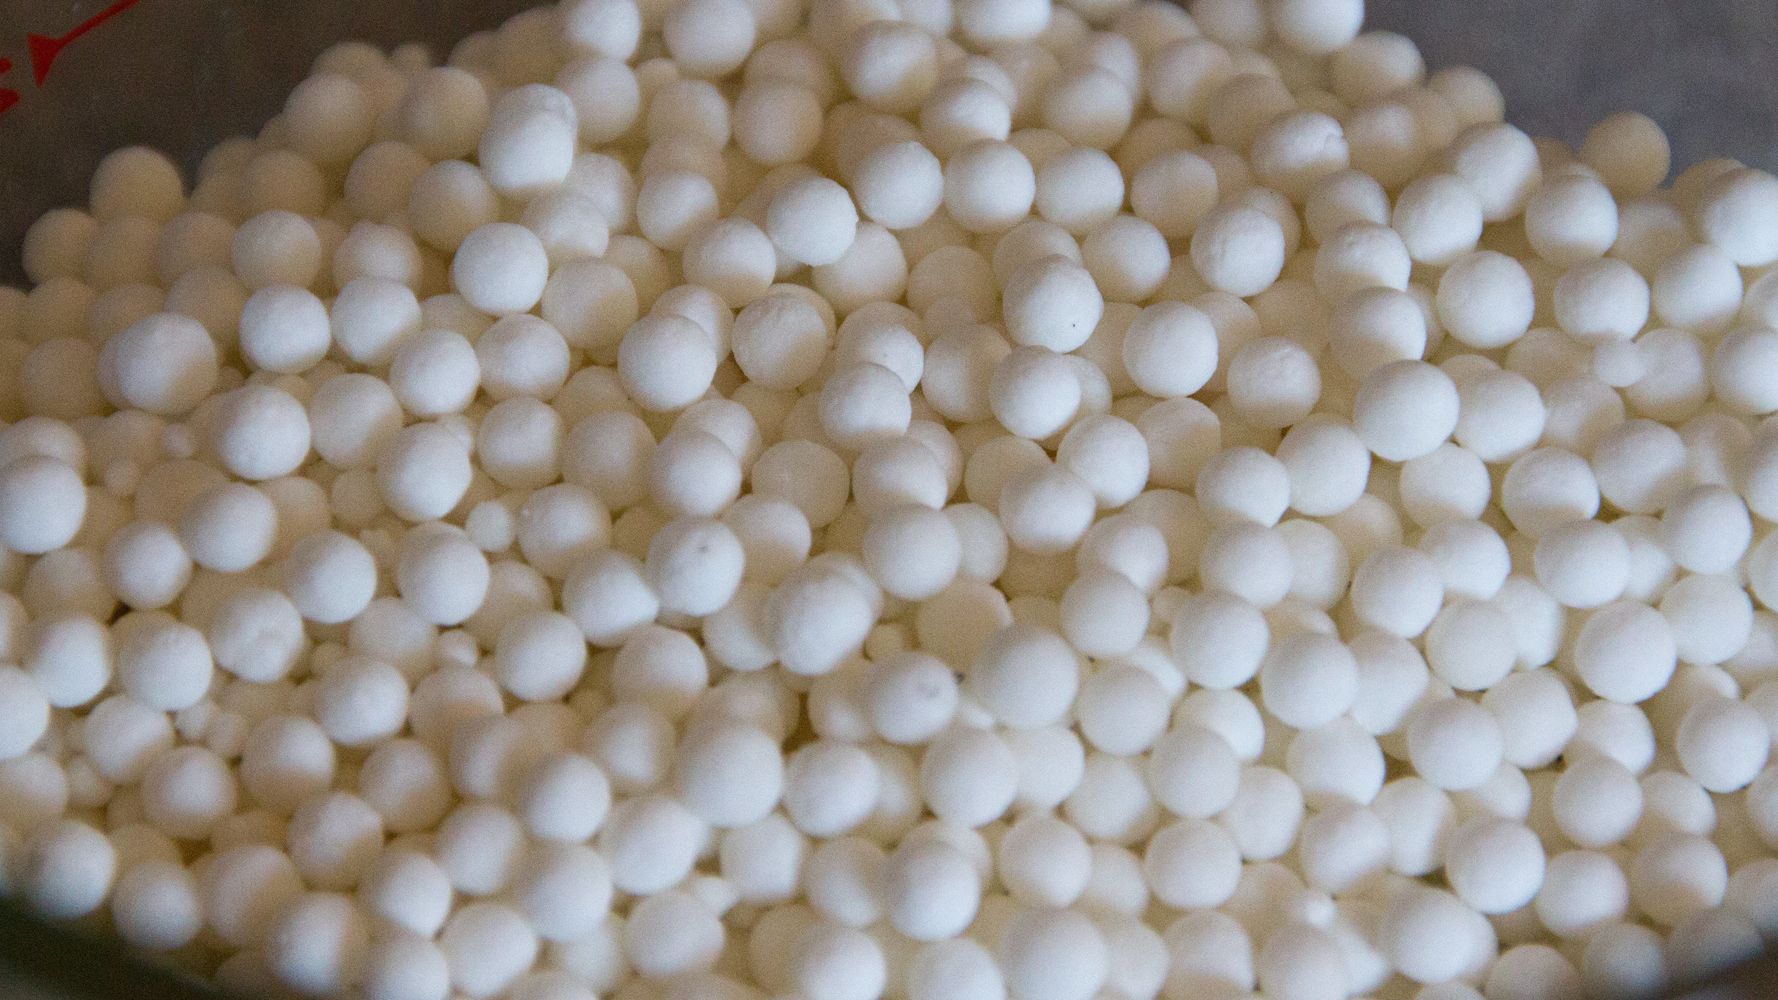 So What Exactly Is Tapioca, Anyway?